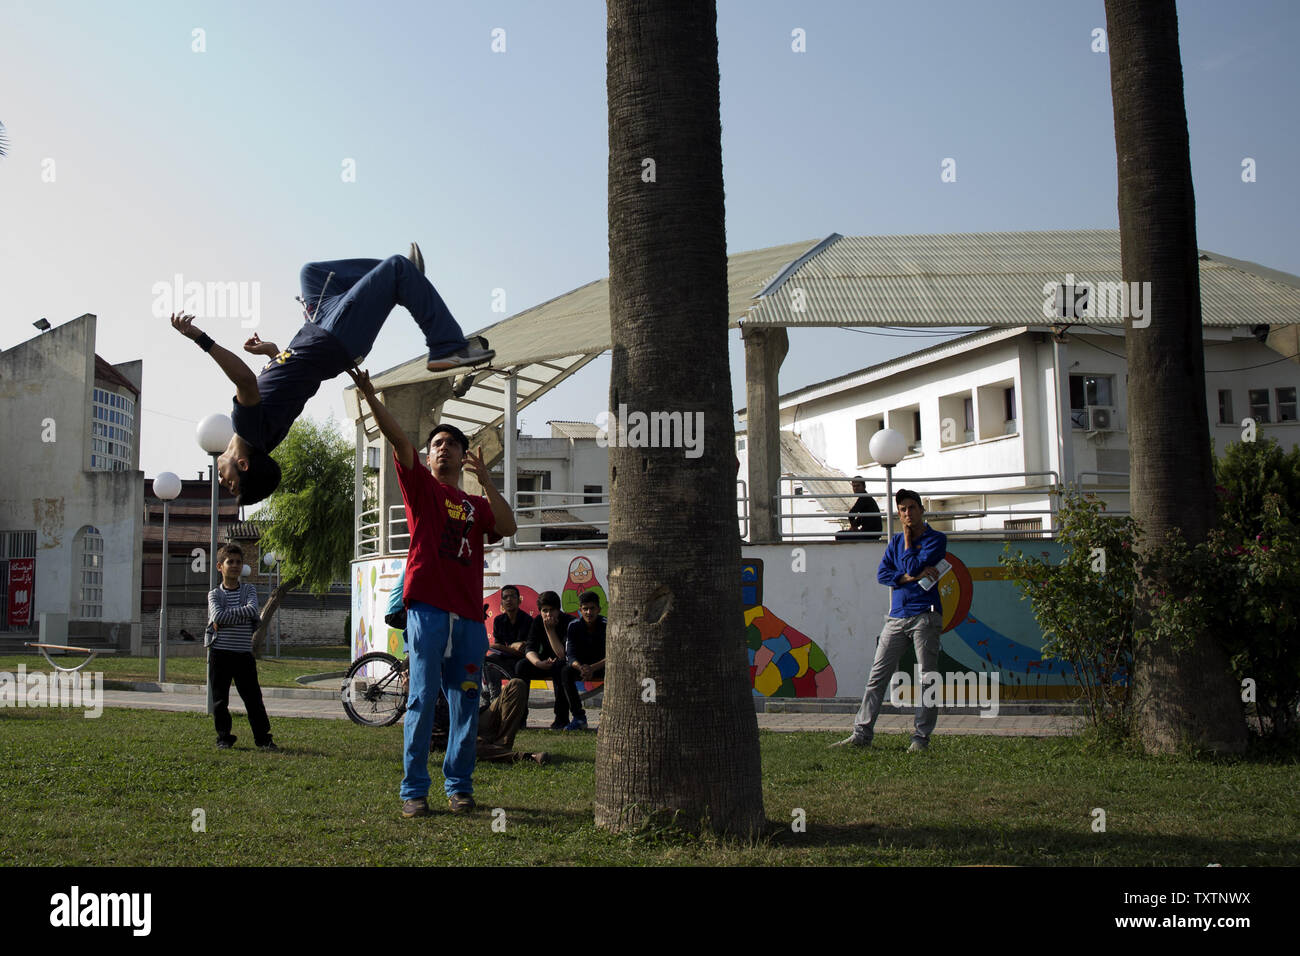 Iranian teens practice Parkour, an urban French training discipline, at a park in Sari ,the provincial capital of Mazandaran province in the north of Iran, May 24, 2014. During last couple of years, Parkour has been a popular trend among Iranian youth.     UPI/Maryam Rahmanian Stock Photo